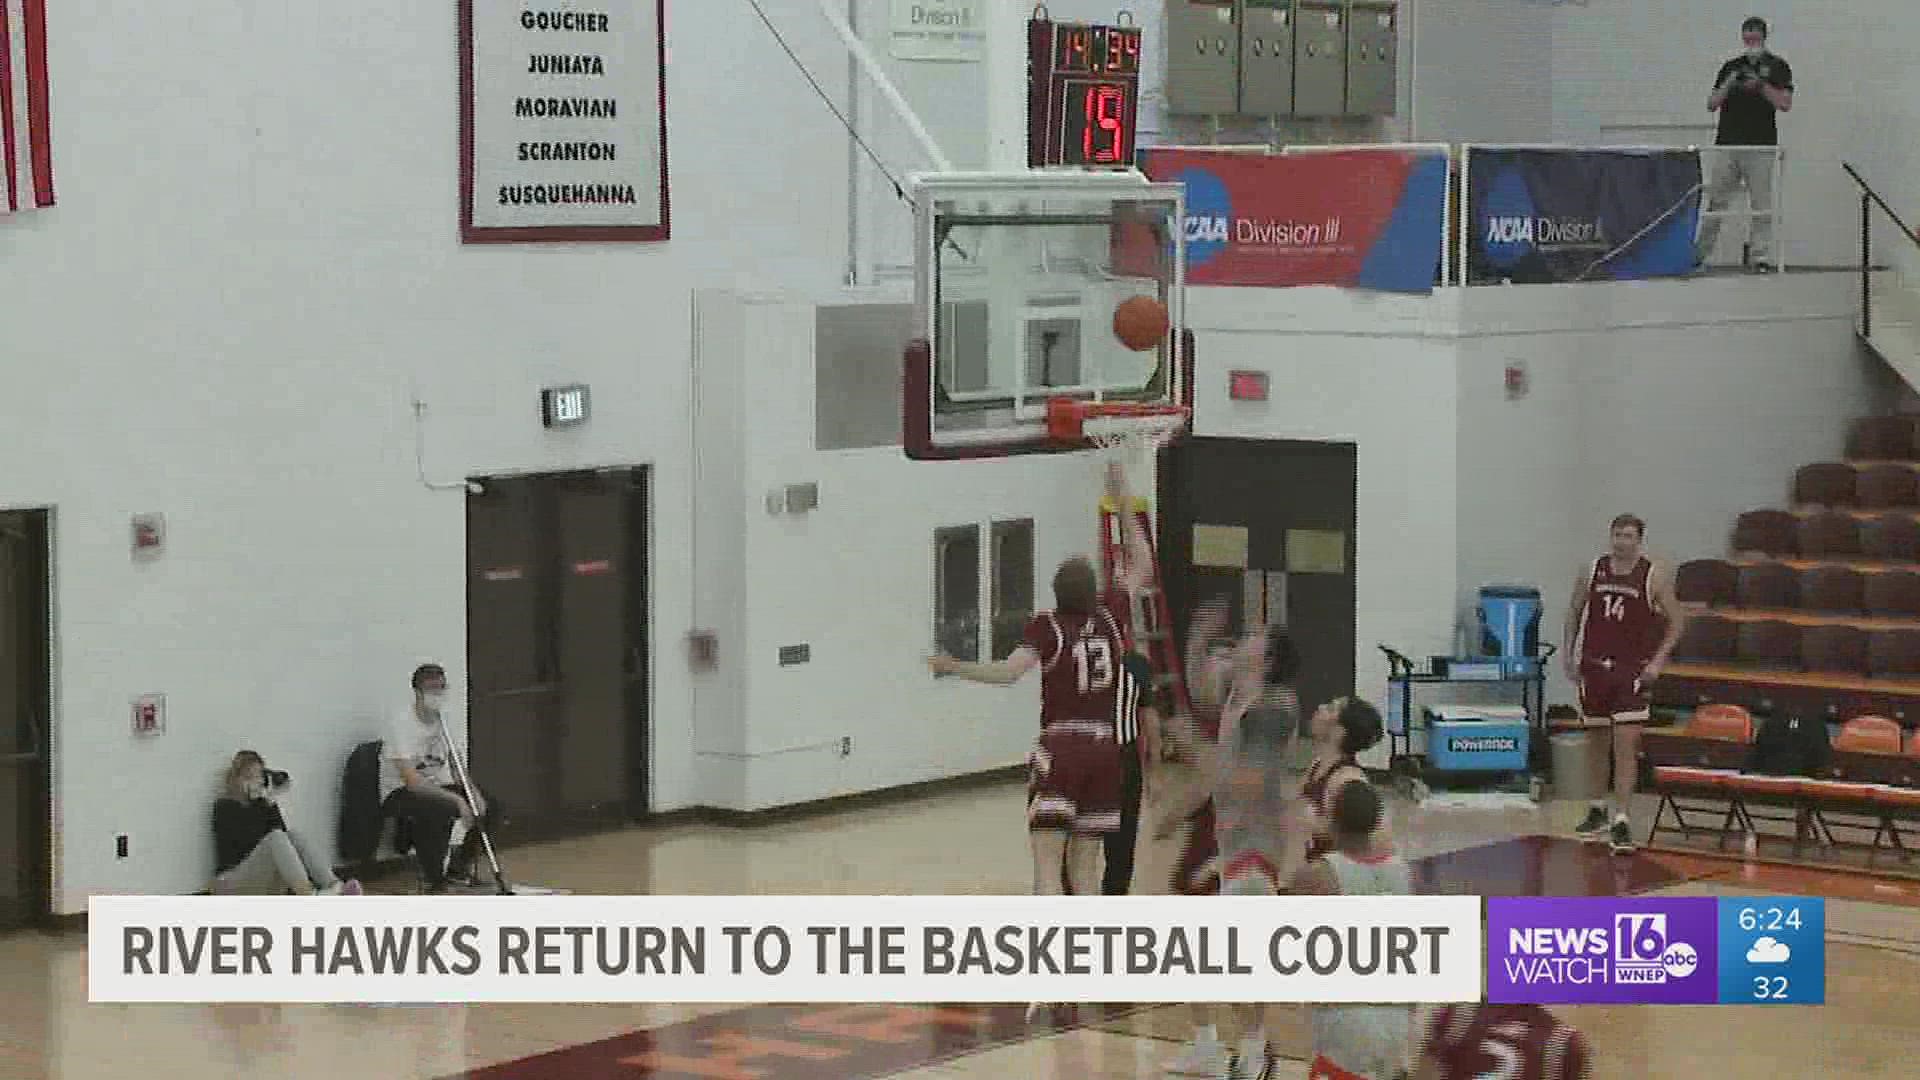 Susquehanna Men's basketball back after sitting out last season due to Covid-19